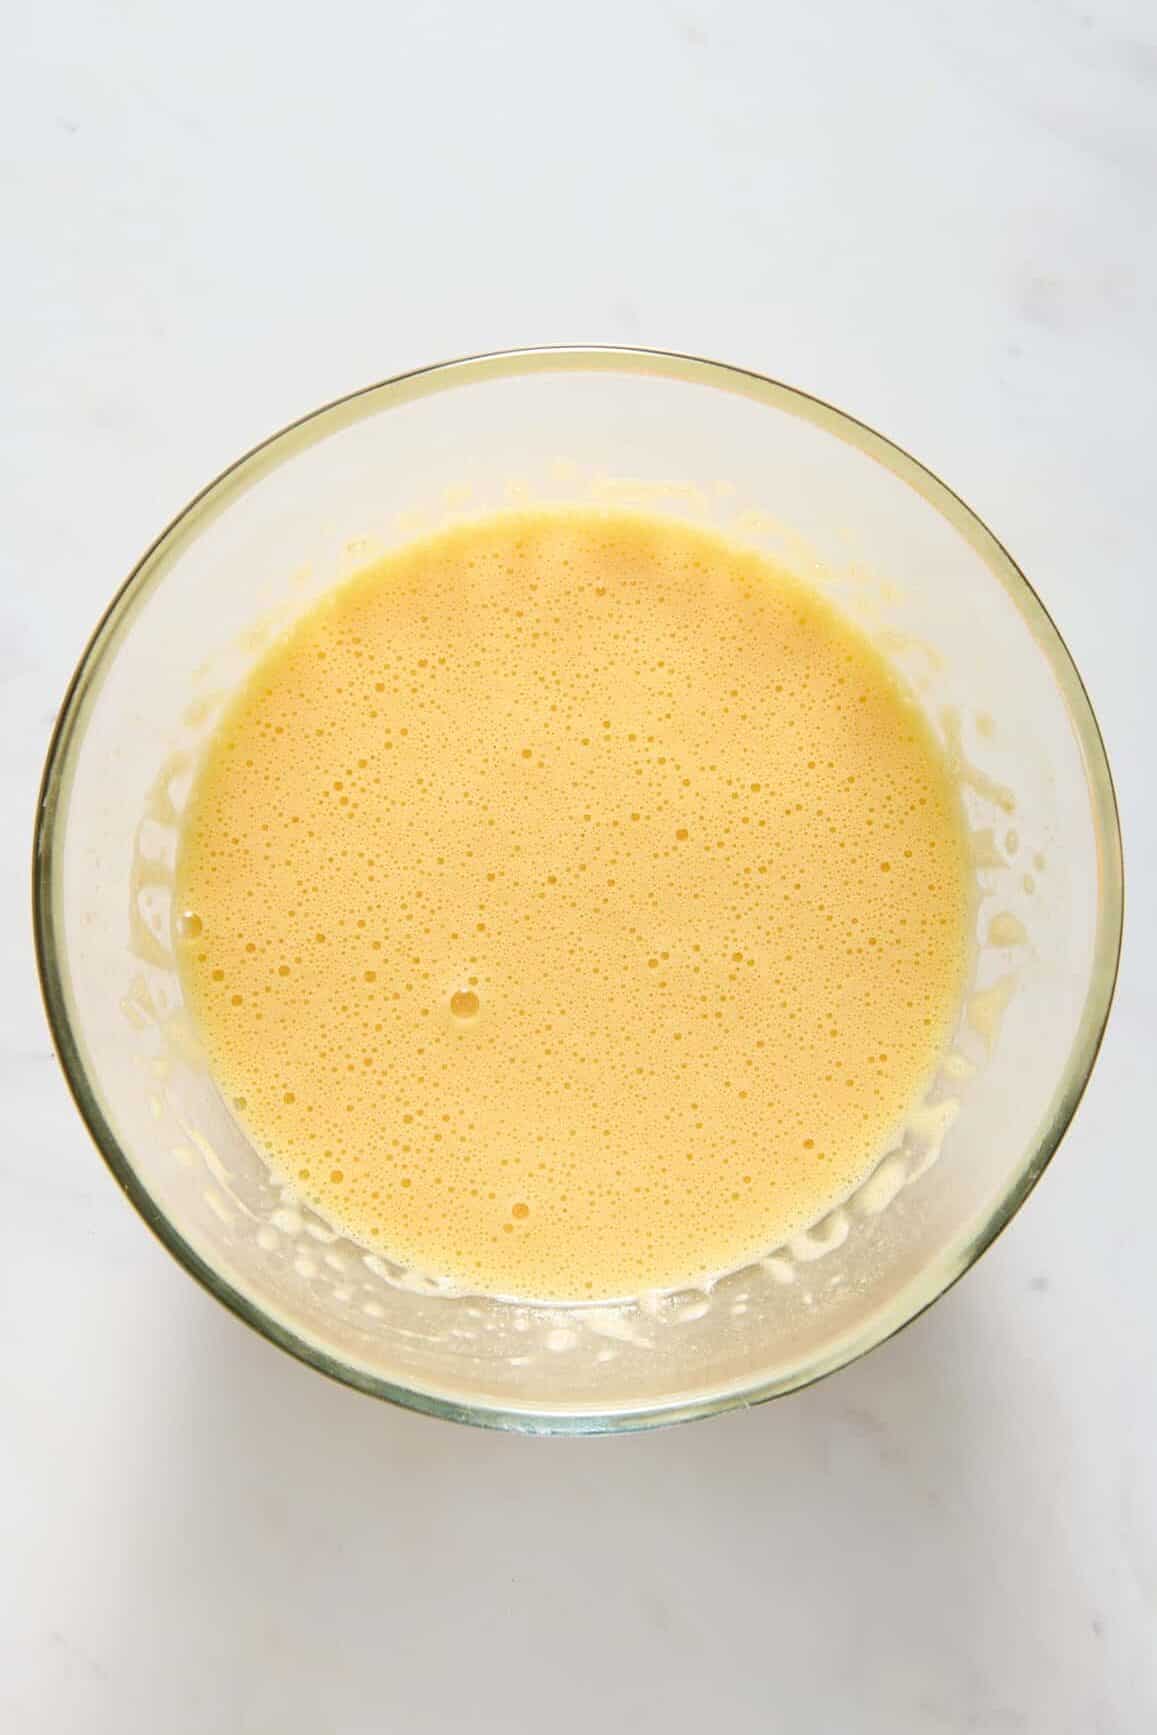 Image of an egg mixture, sitting in a large glass mixing bowl.